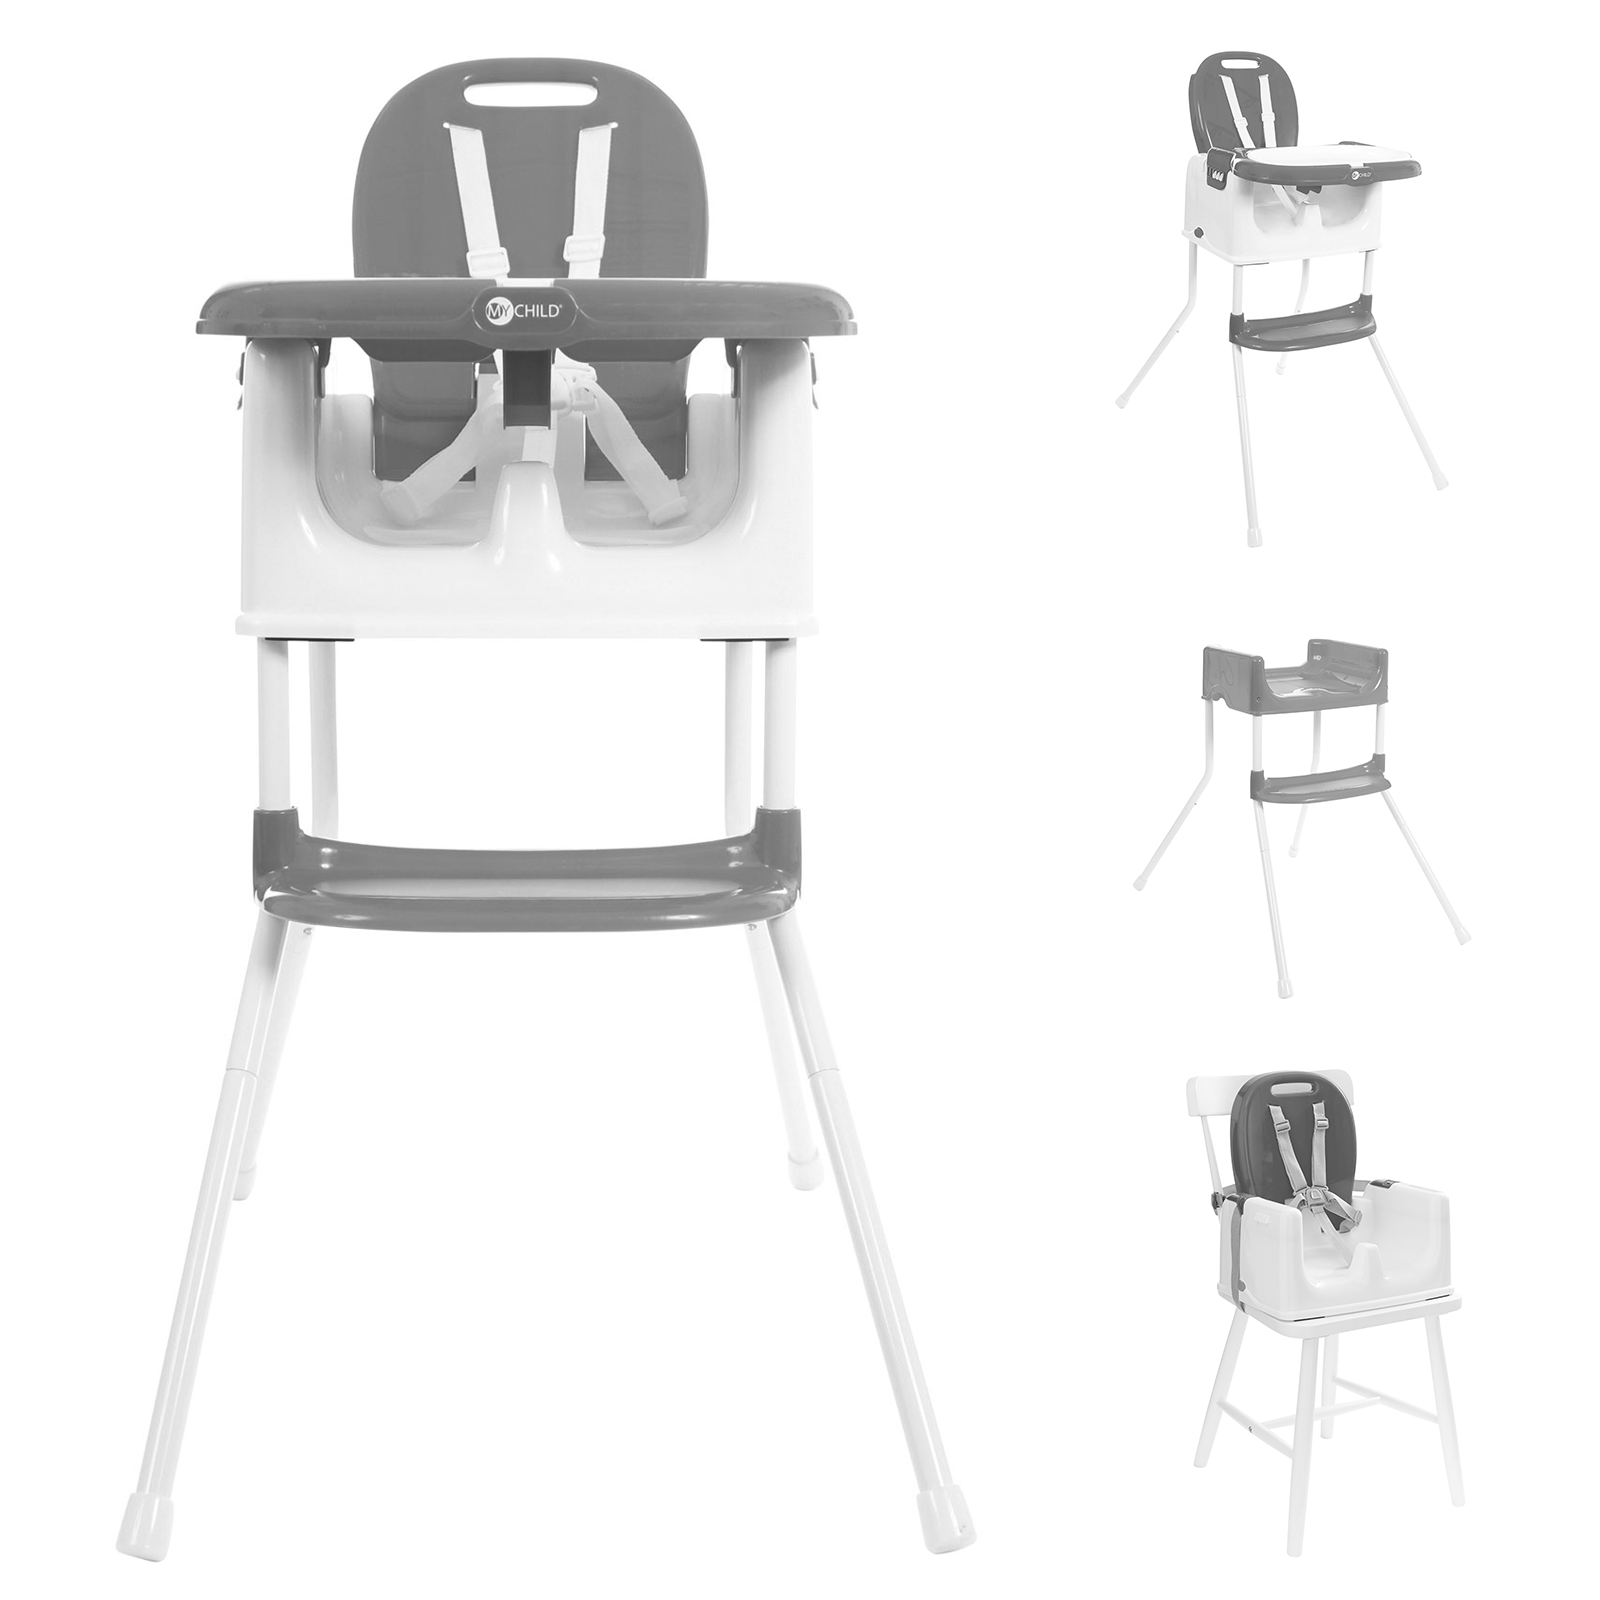 My Child Graze 3in1 Highchair, Low Chair and Booster Seat - Grey